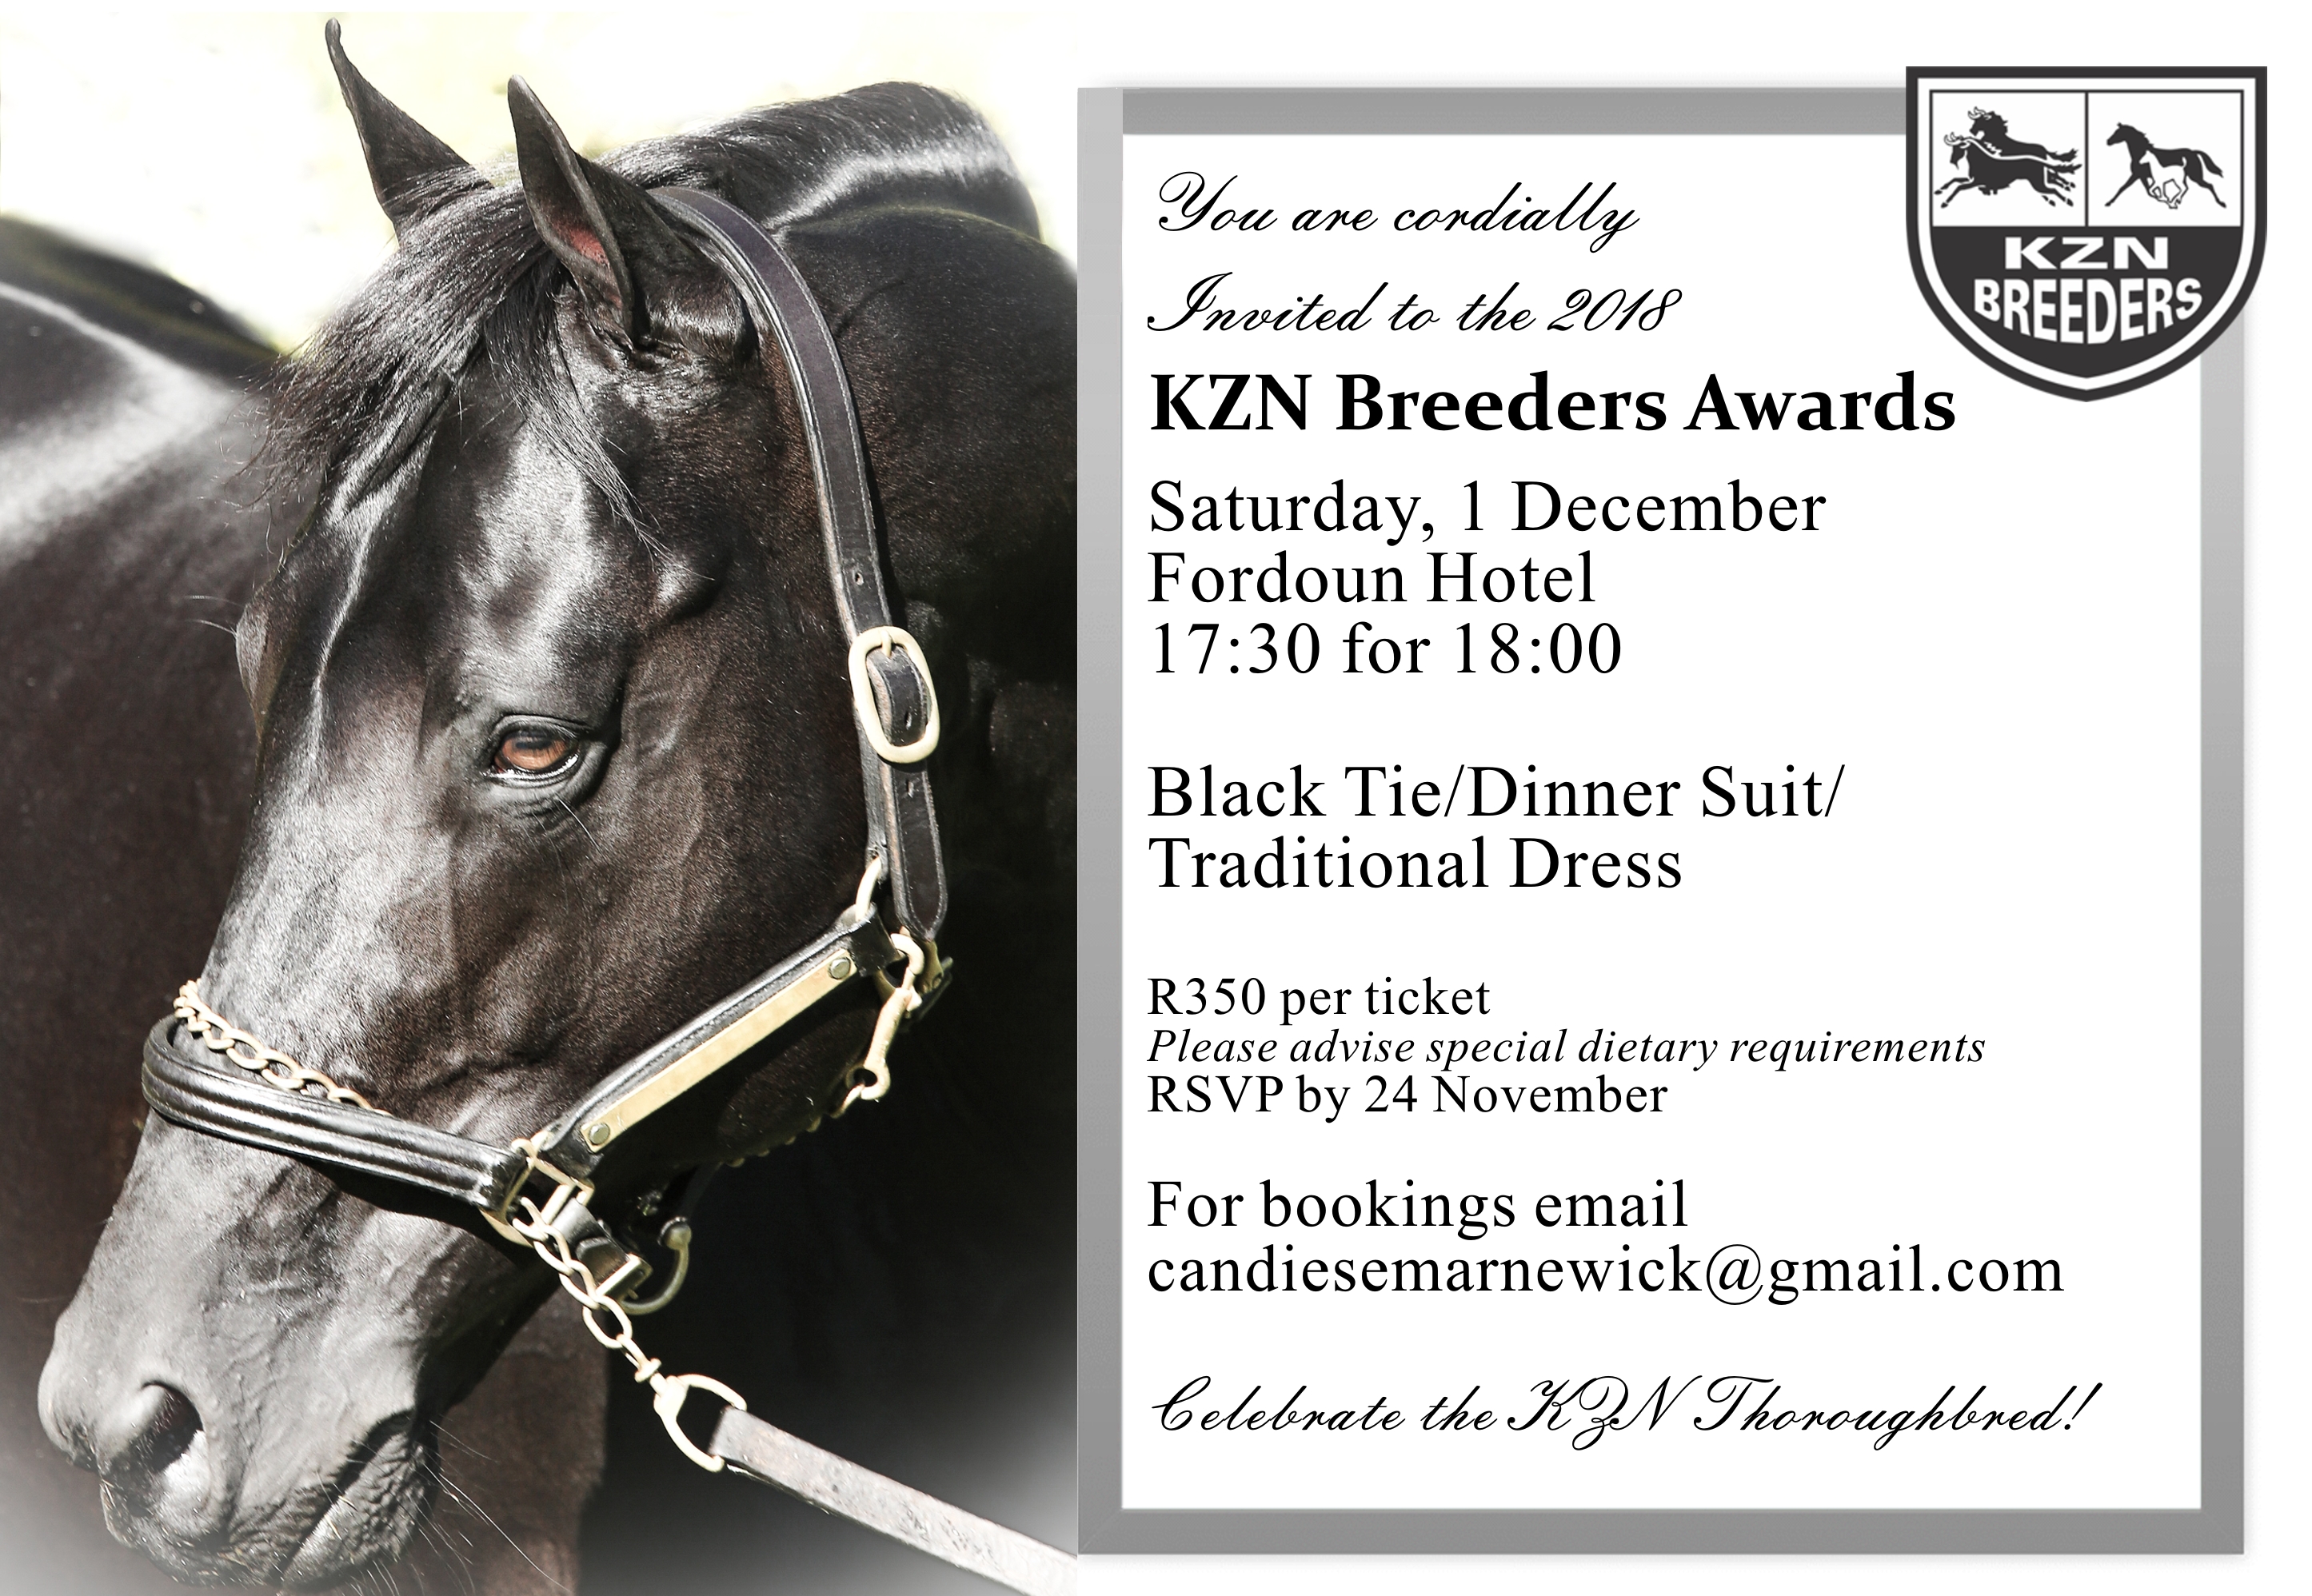 You Are Invited To The KZN Breeders Awards!